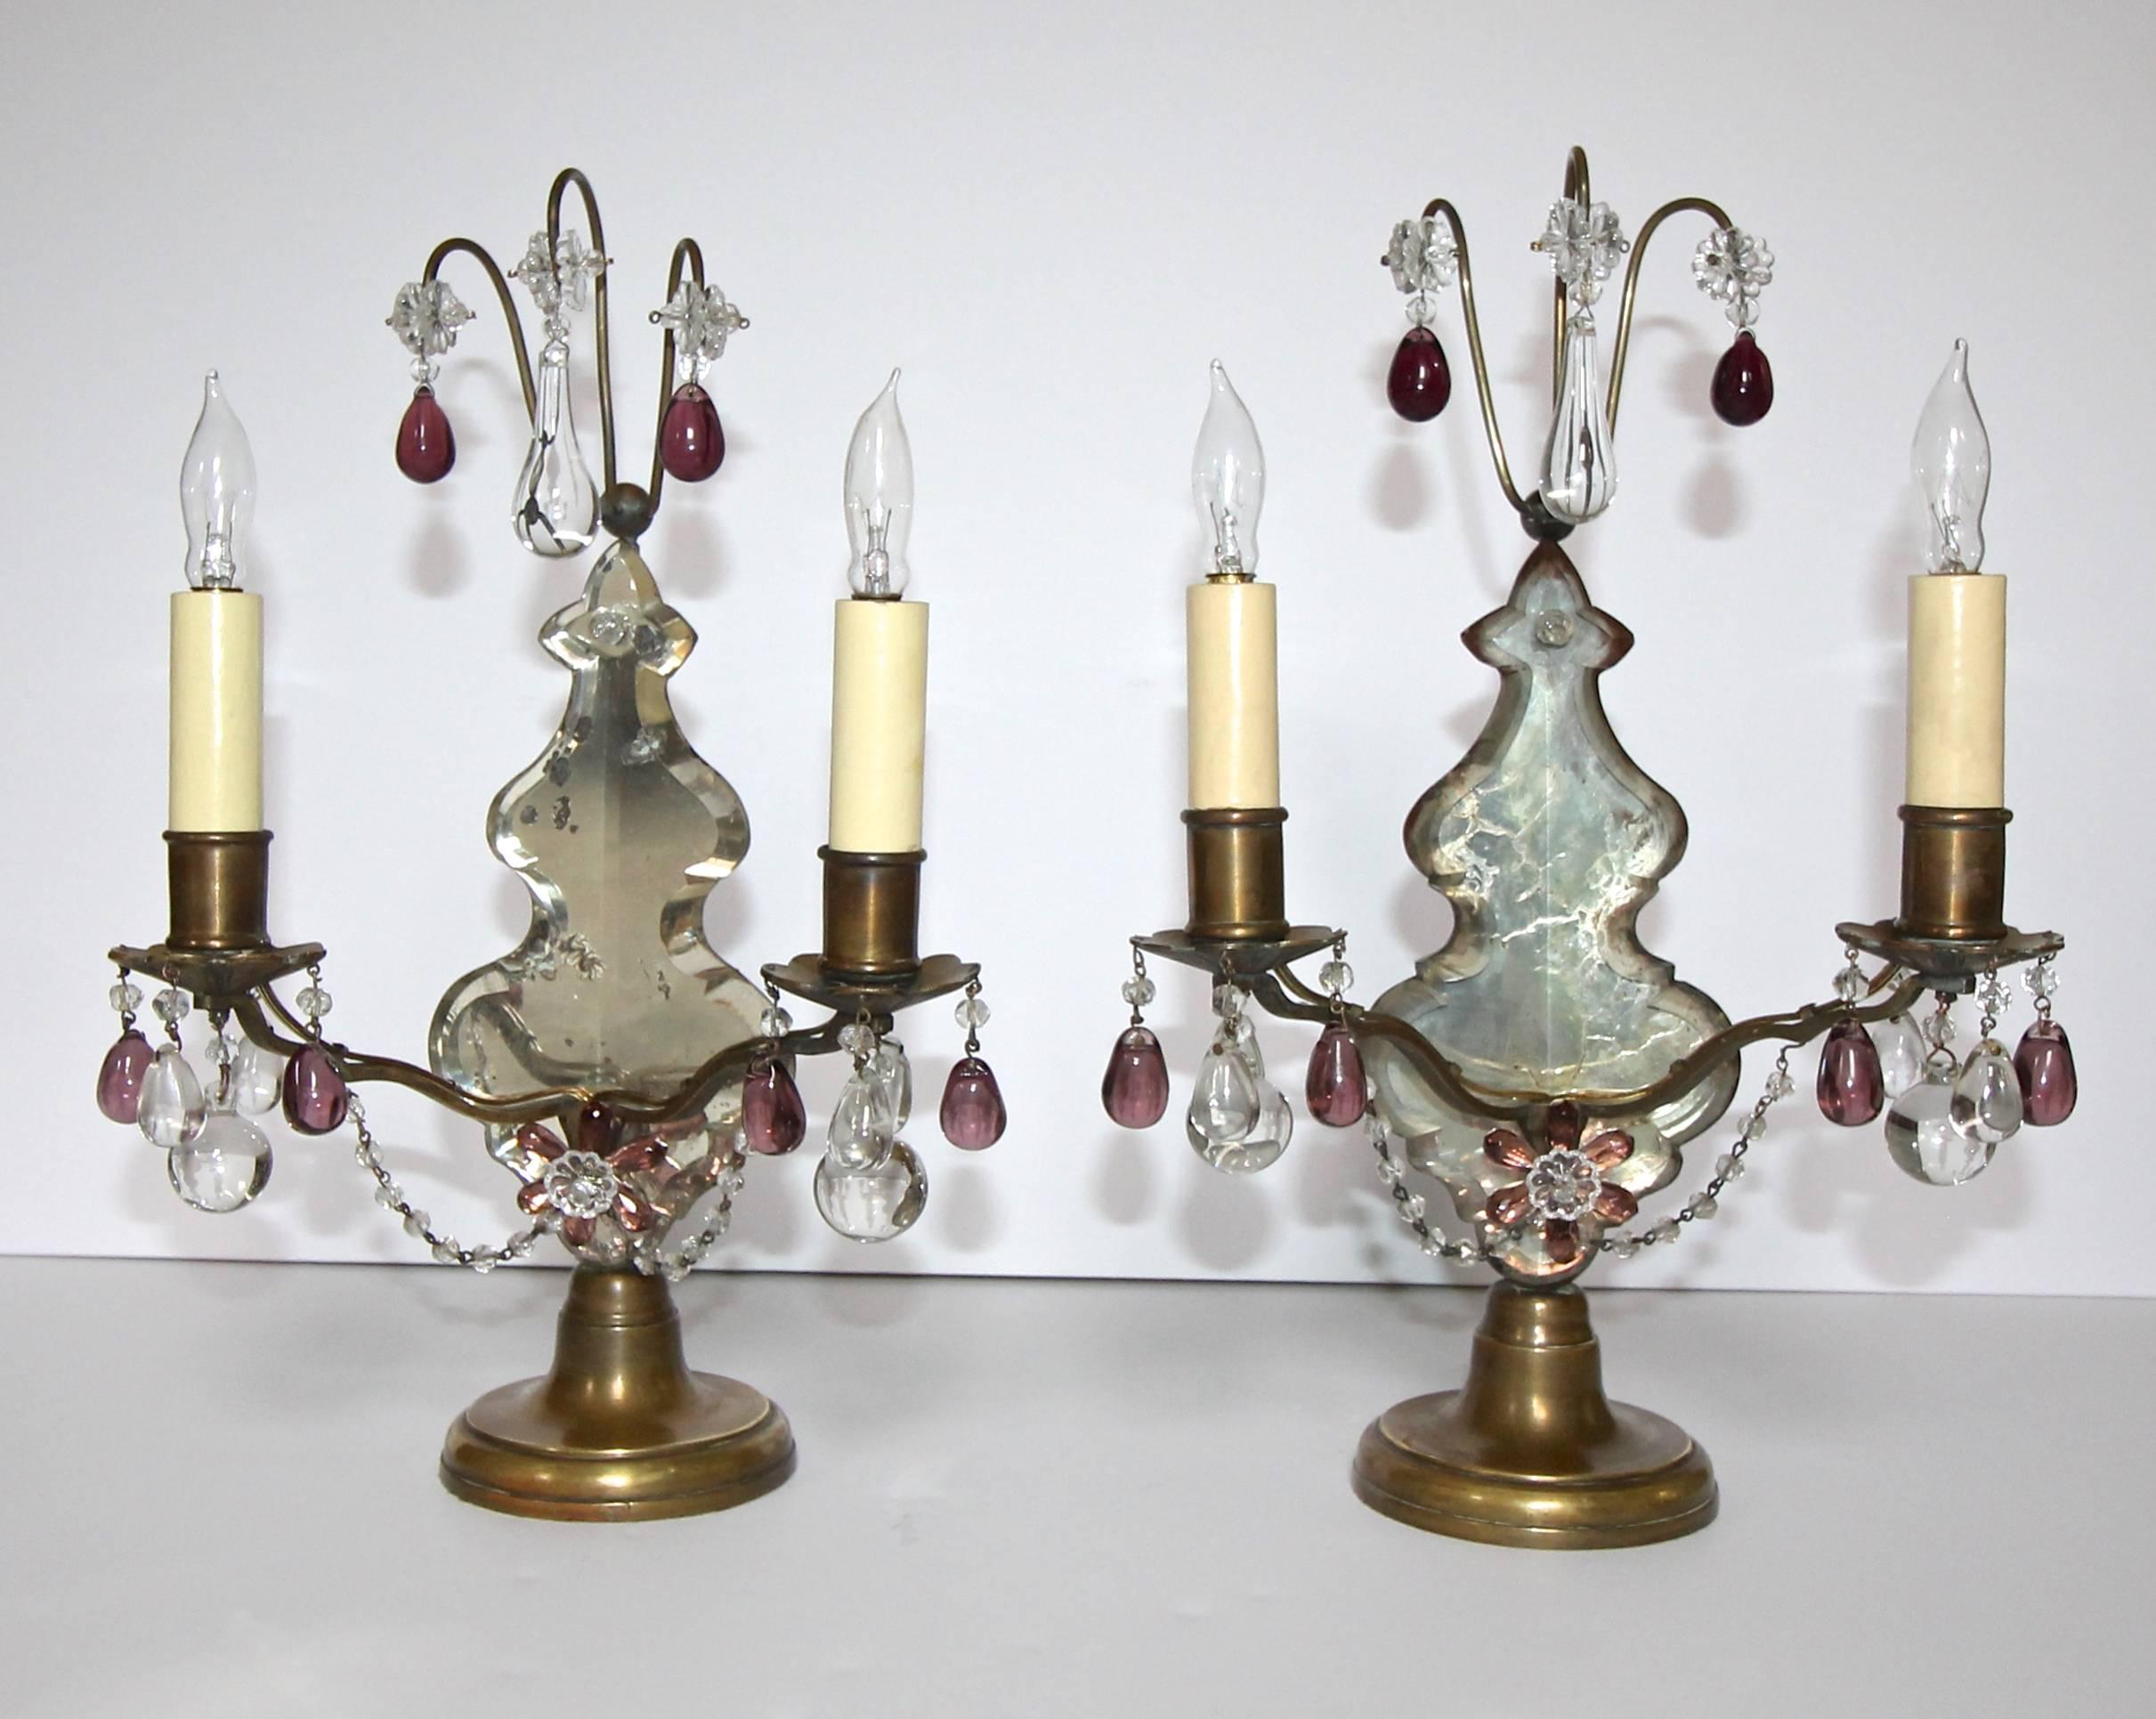 Lovely pair of 1920s French two-light bronze girandoles or mantel lamps with a large mirrored crystal pendalogues. Dressed in clear and amethyst colored glass crystals. Bronze or brass has acquired a warm and deep patina. Well scaled for a mantel in